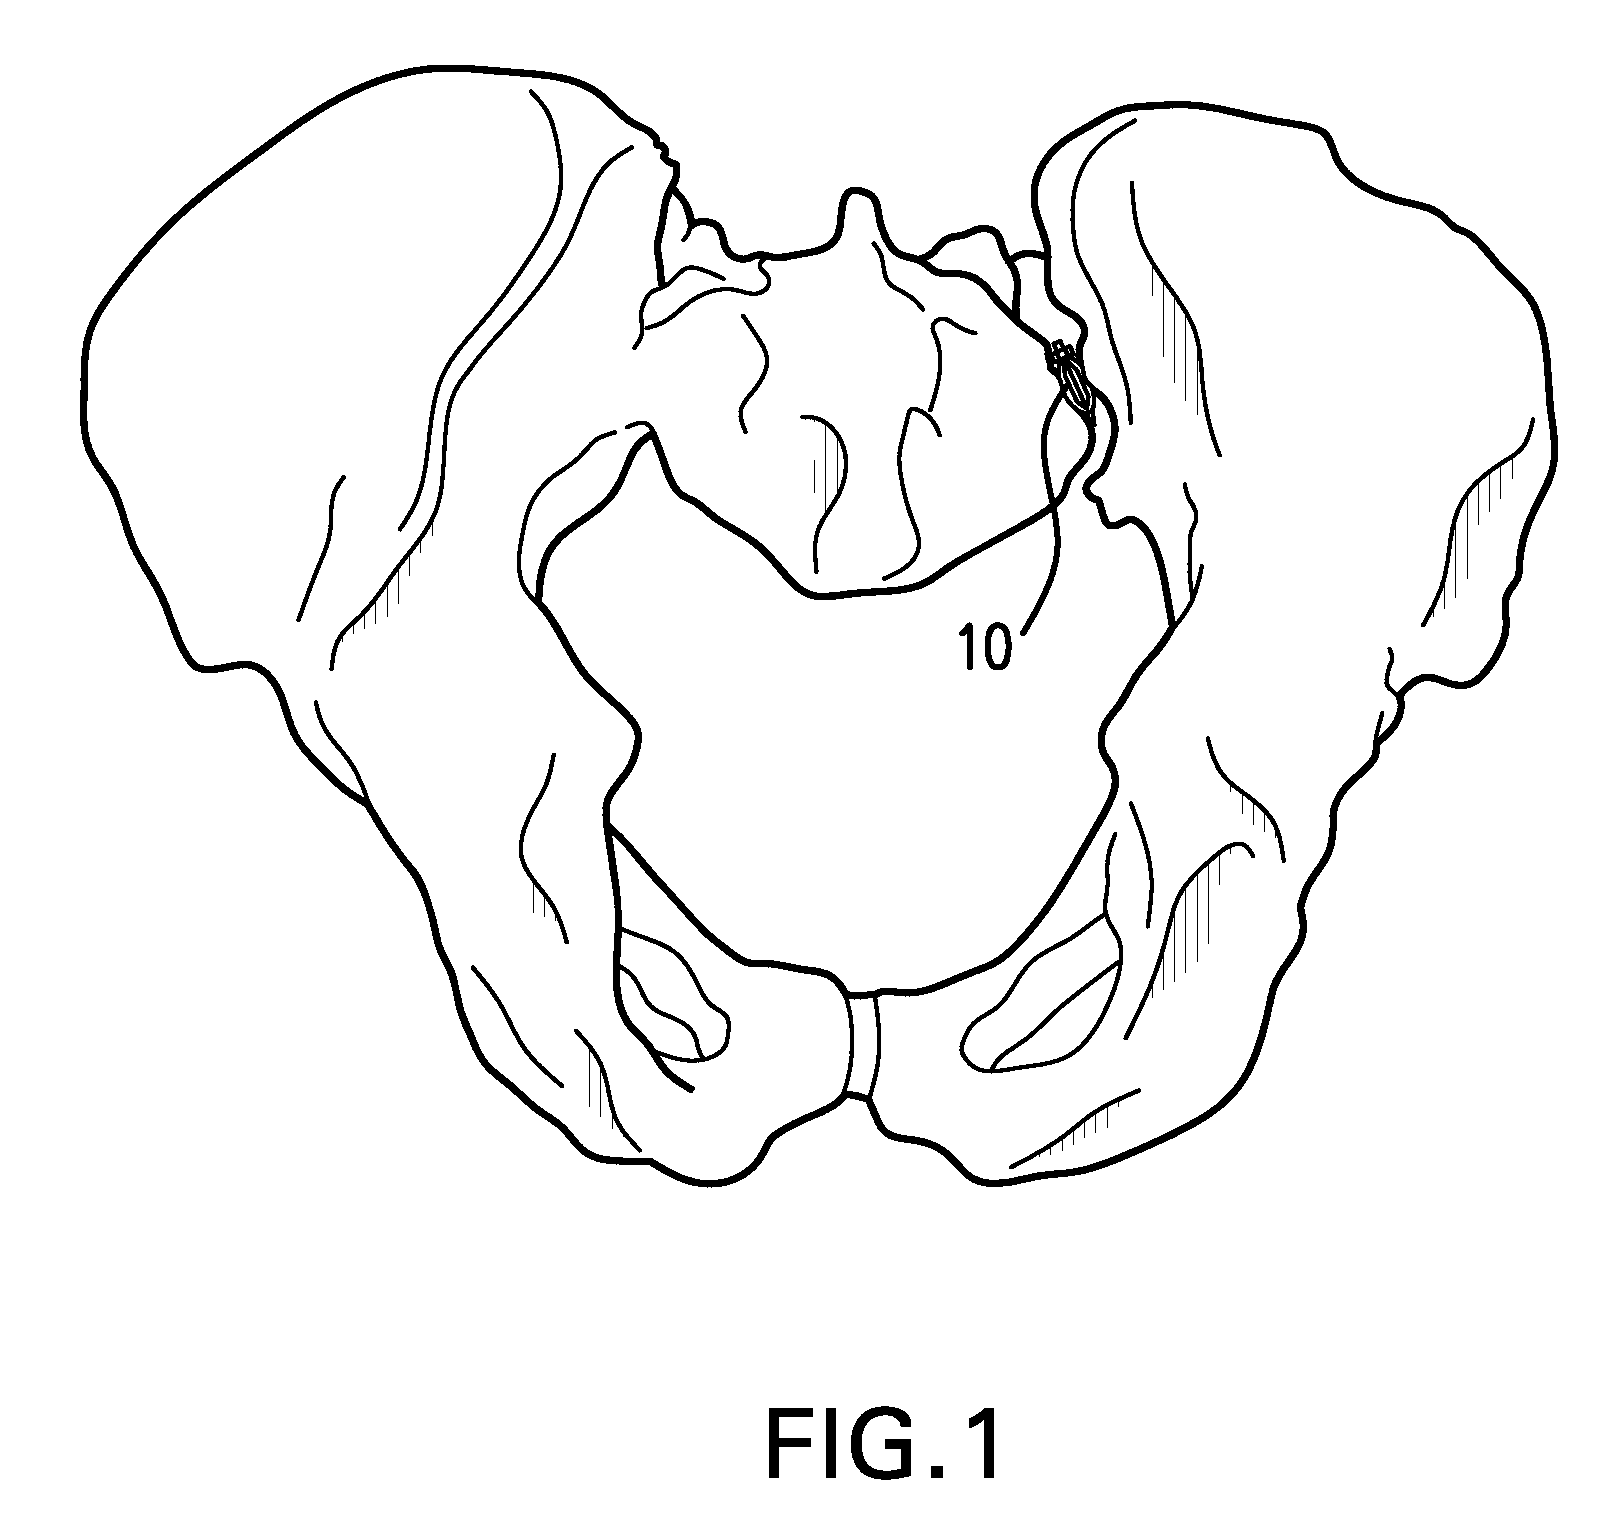 Methods of stabilizing the sacroiliac joint